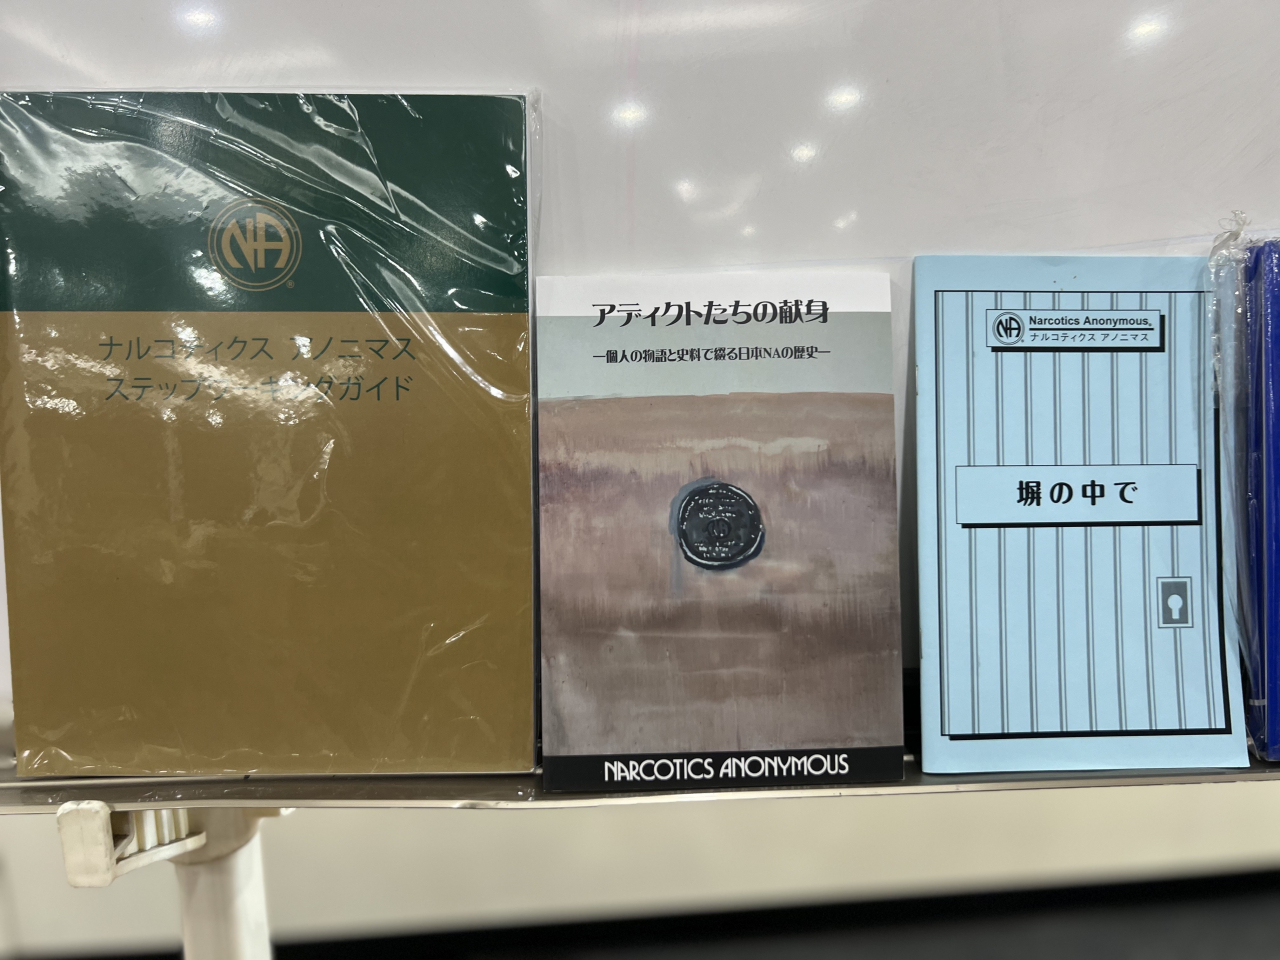 Books on Narcotics Anonymous and drug recovery written in Japanese on display at the 19th NA workshop in Seoul, Saturday. (Park Jun-hee/The Korea Herald)